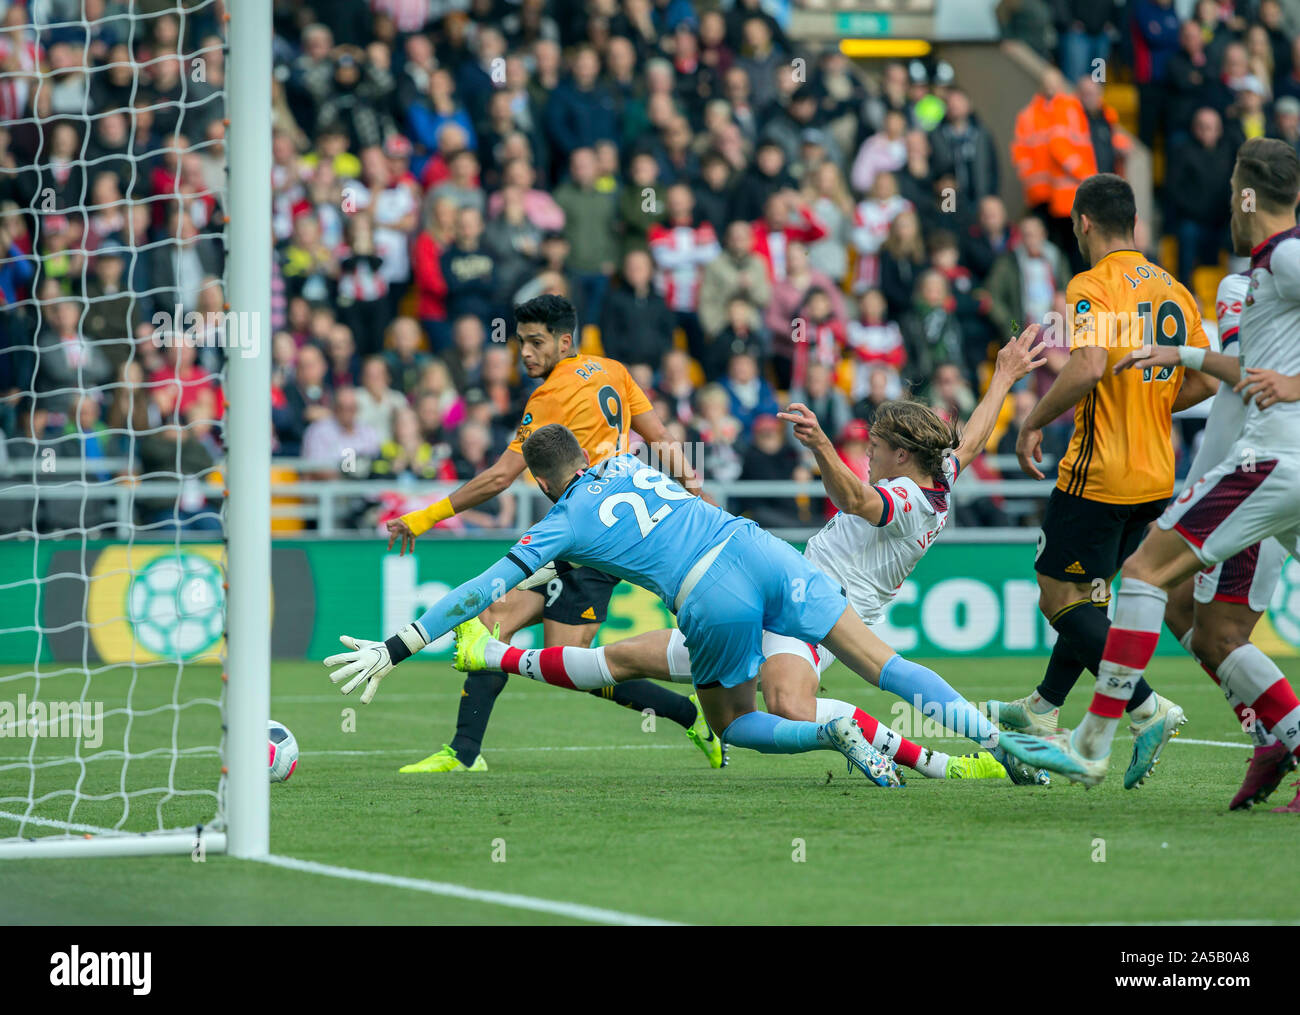 Wolverhampton, UK. 19th Oct, 2019. ; Molineux Stadium, Wolverhampton, West Midlands, England; English Premier League Football, Wolverhampton Wanderers versus Southampton; Raul Jimenez of Wolverhampton Wanderers scoring past Angus Gunn of Southampton in the 42nd minute but after inspection by the Video Assistant Referee Kevin Friend Referee Peter Bankes rules the goal as disallowed - Strictly Editorial Use Only. No use with unauthorized audio, video, data, fixture lists, club/league logos or 'live' services. Online in-match use limited to 120 images, no video emulation. No use in betting, games Stock Photo